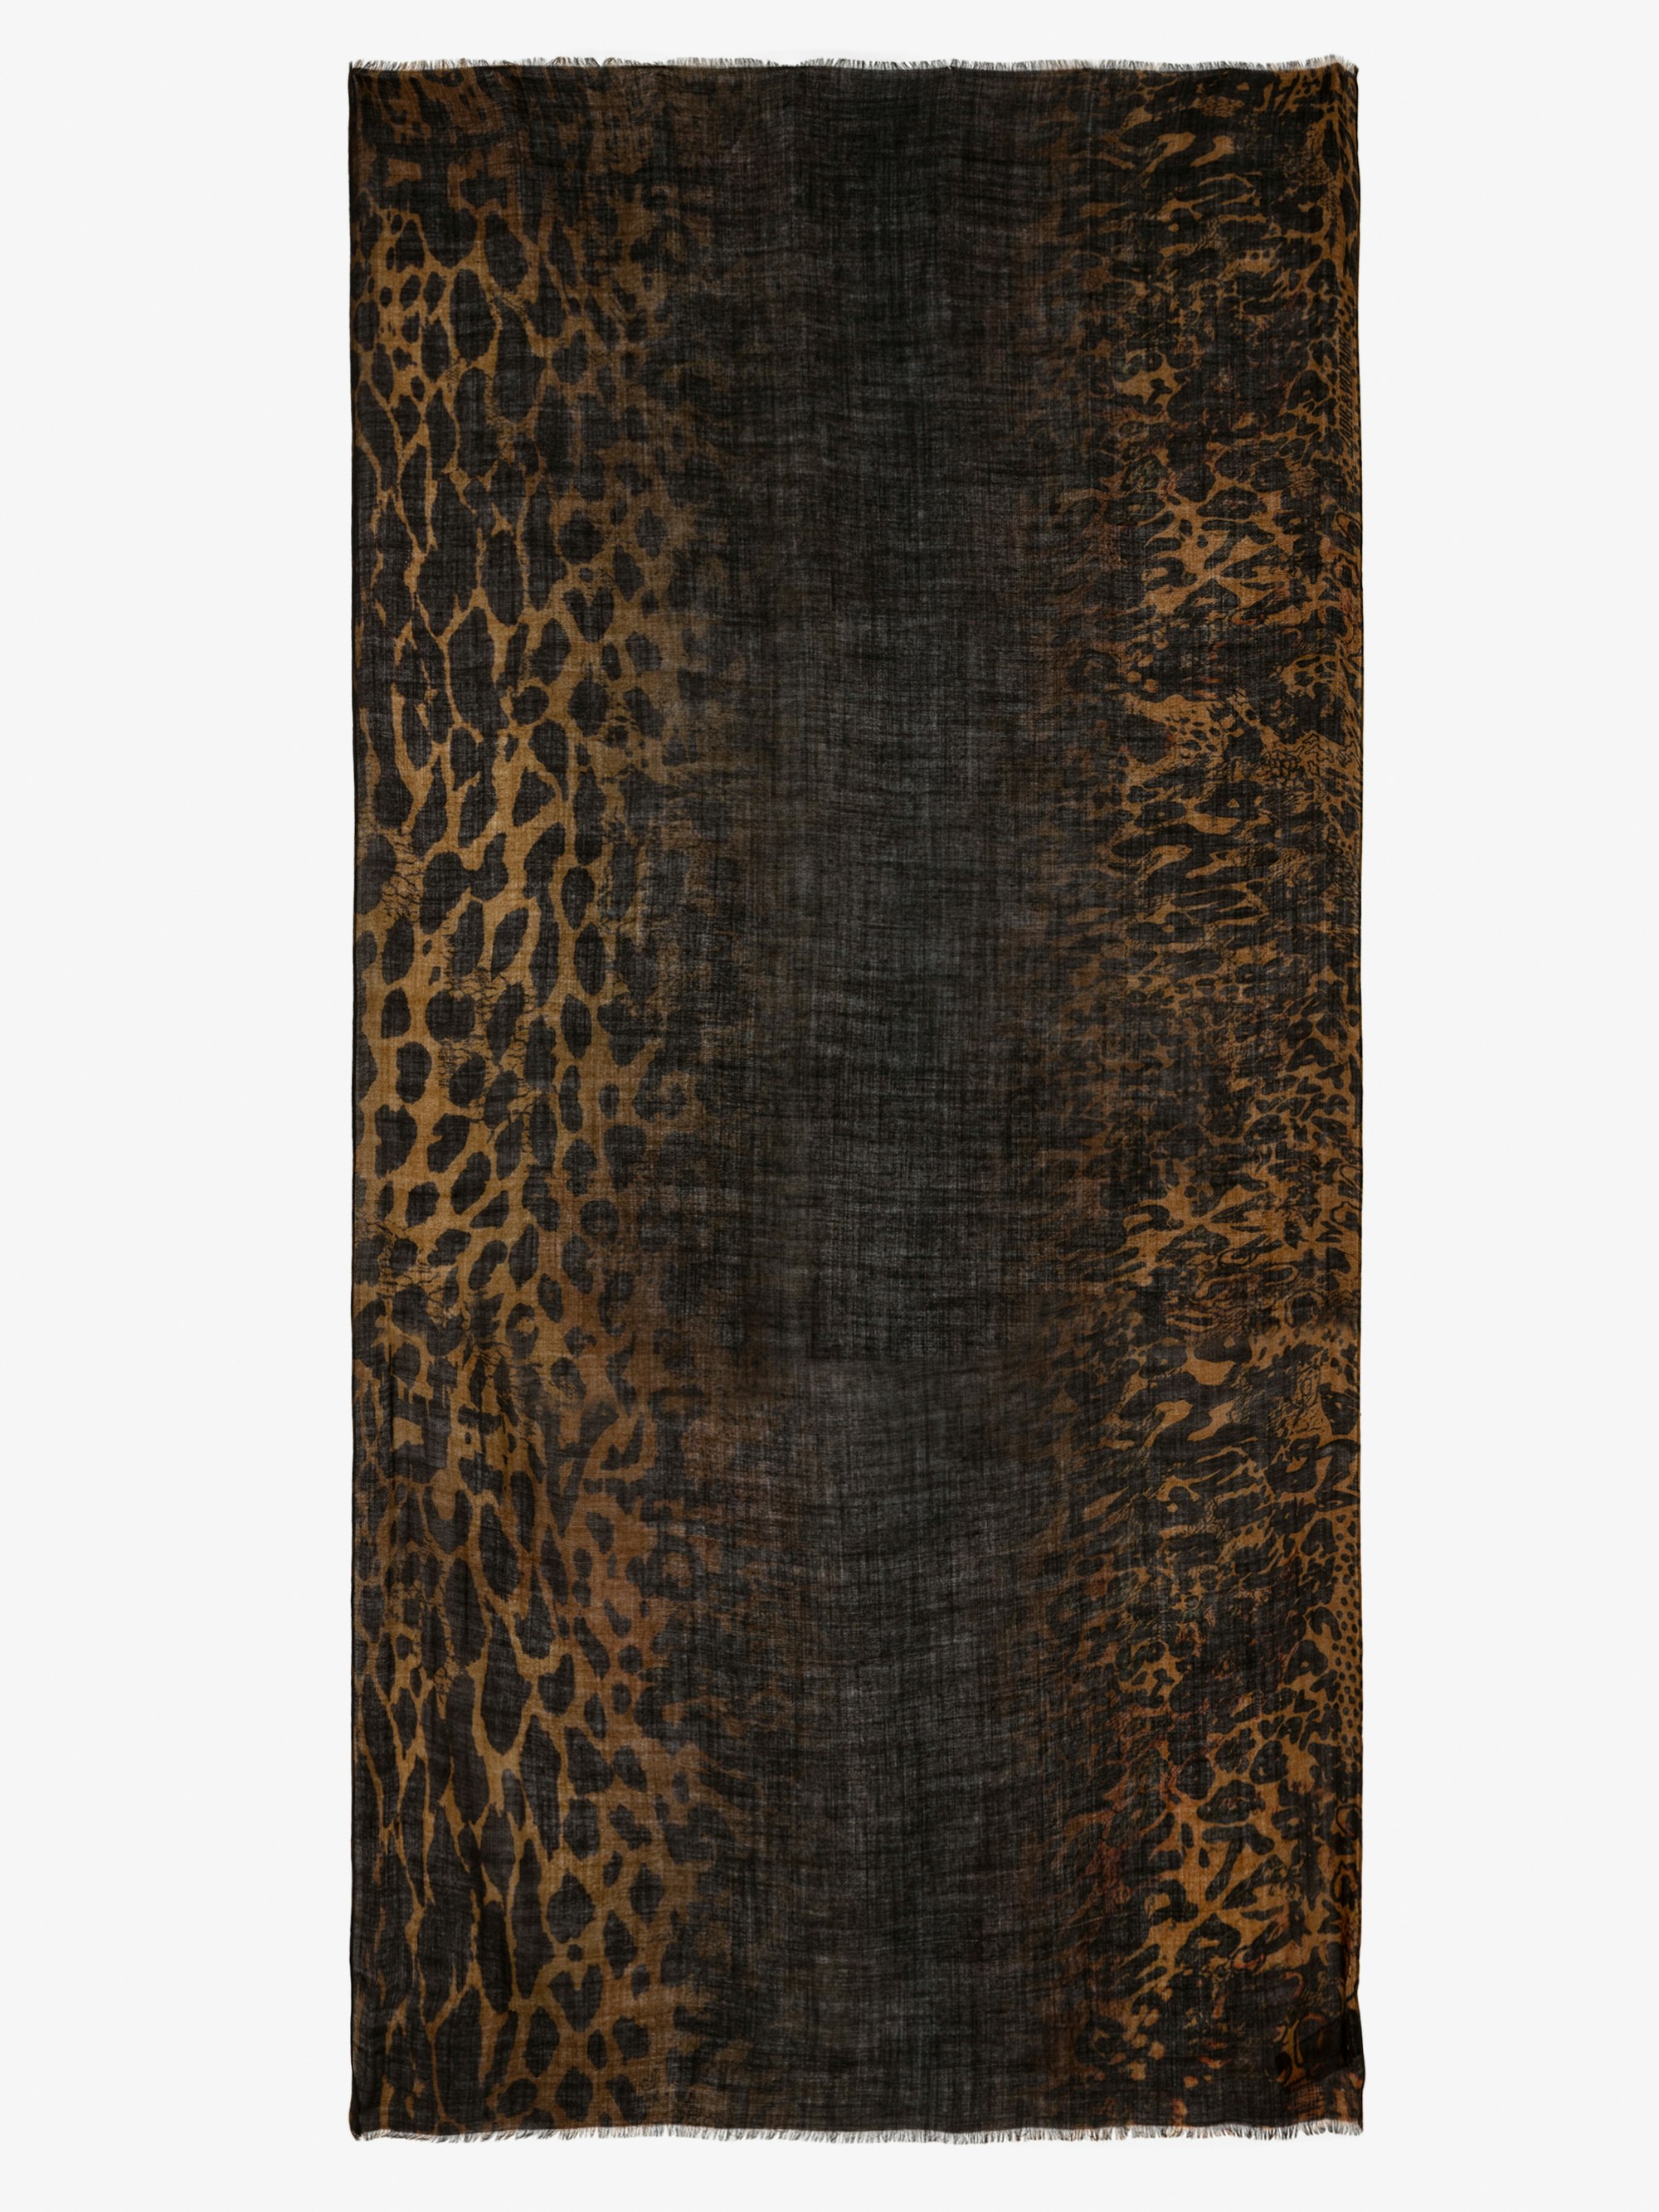 Judy Scarf - Brown wool scarf with leopard print and tie & dye effect.